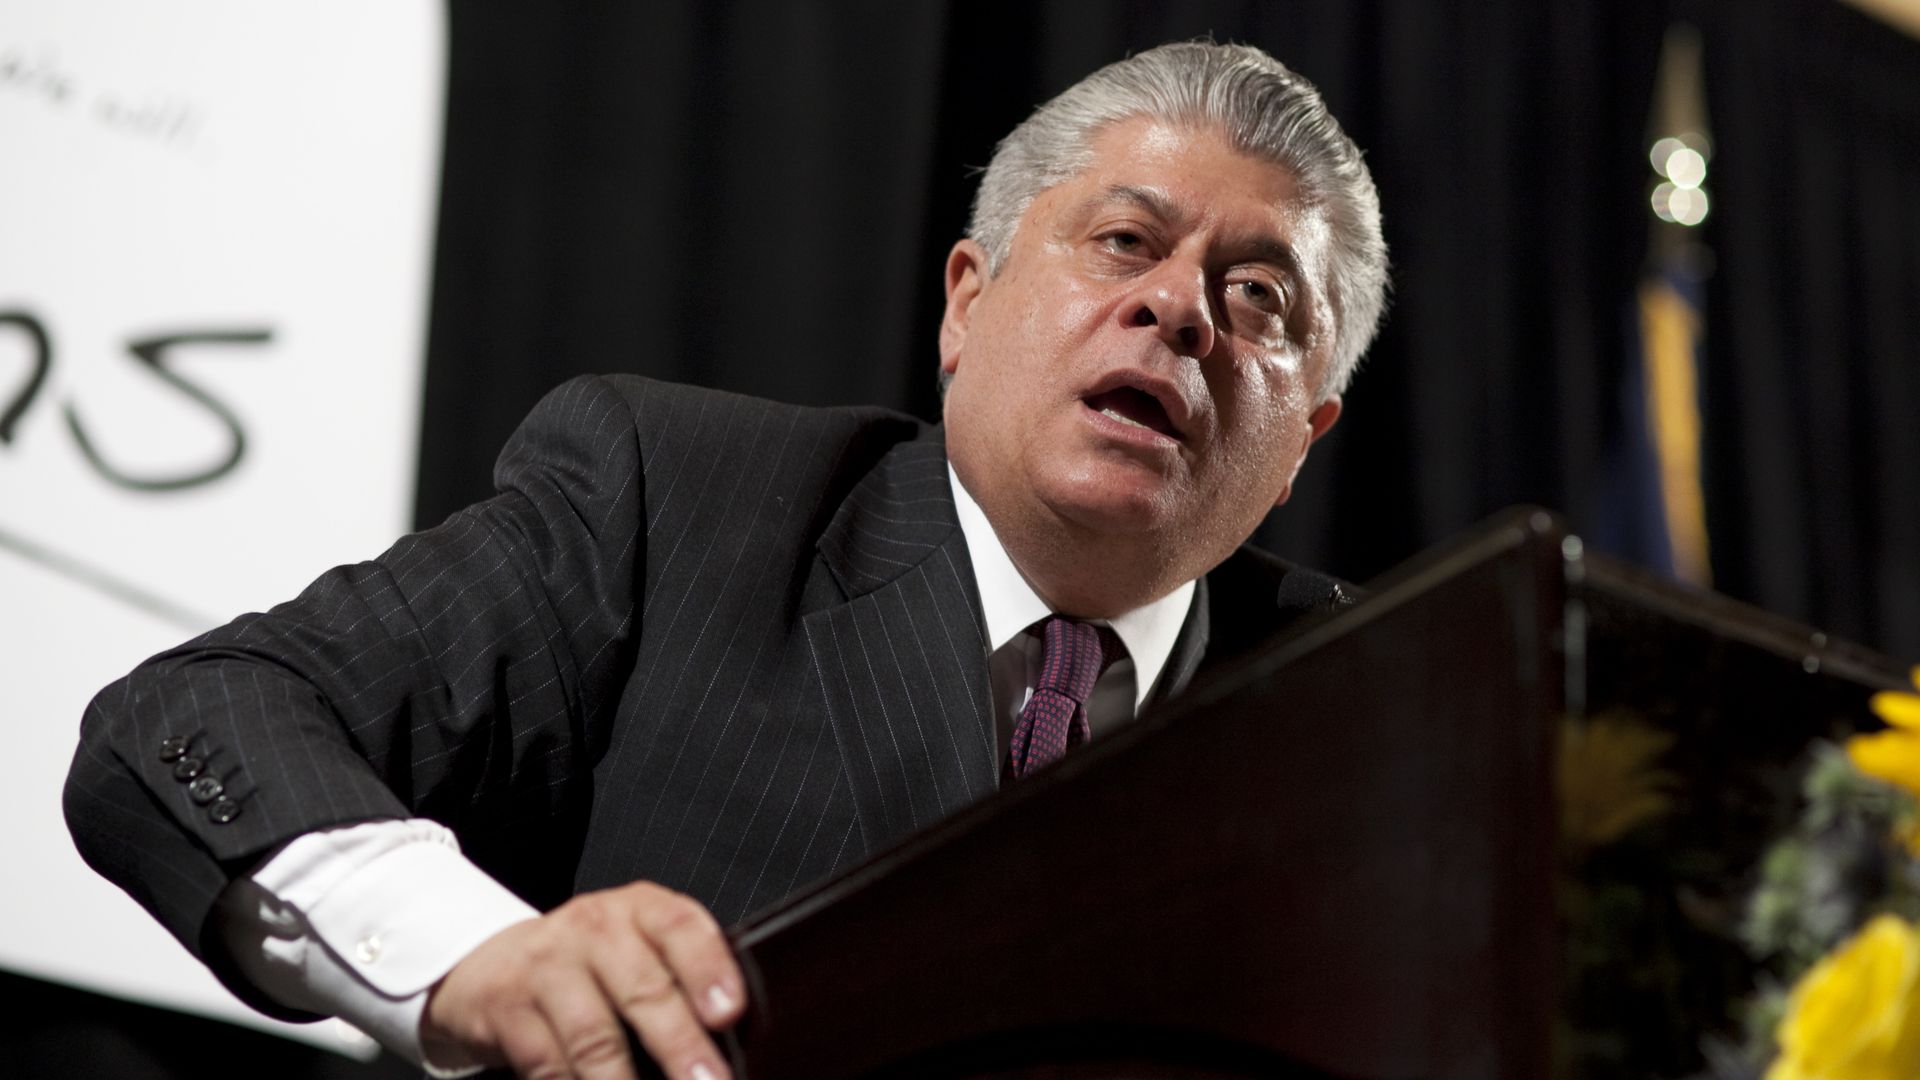 In this image, Andrew Napolitano leans over a podium and speaks at a crowd. 